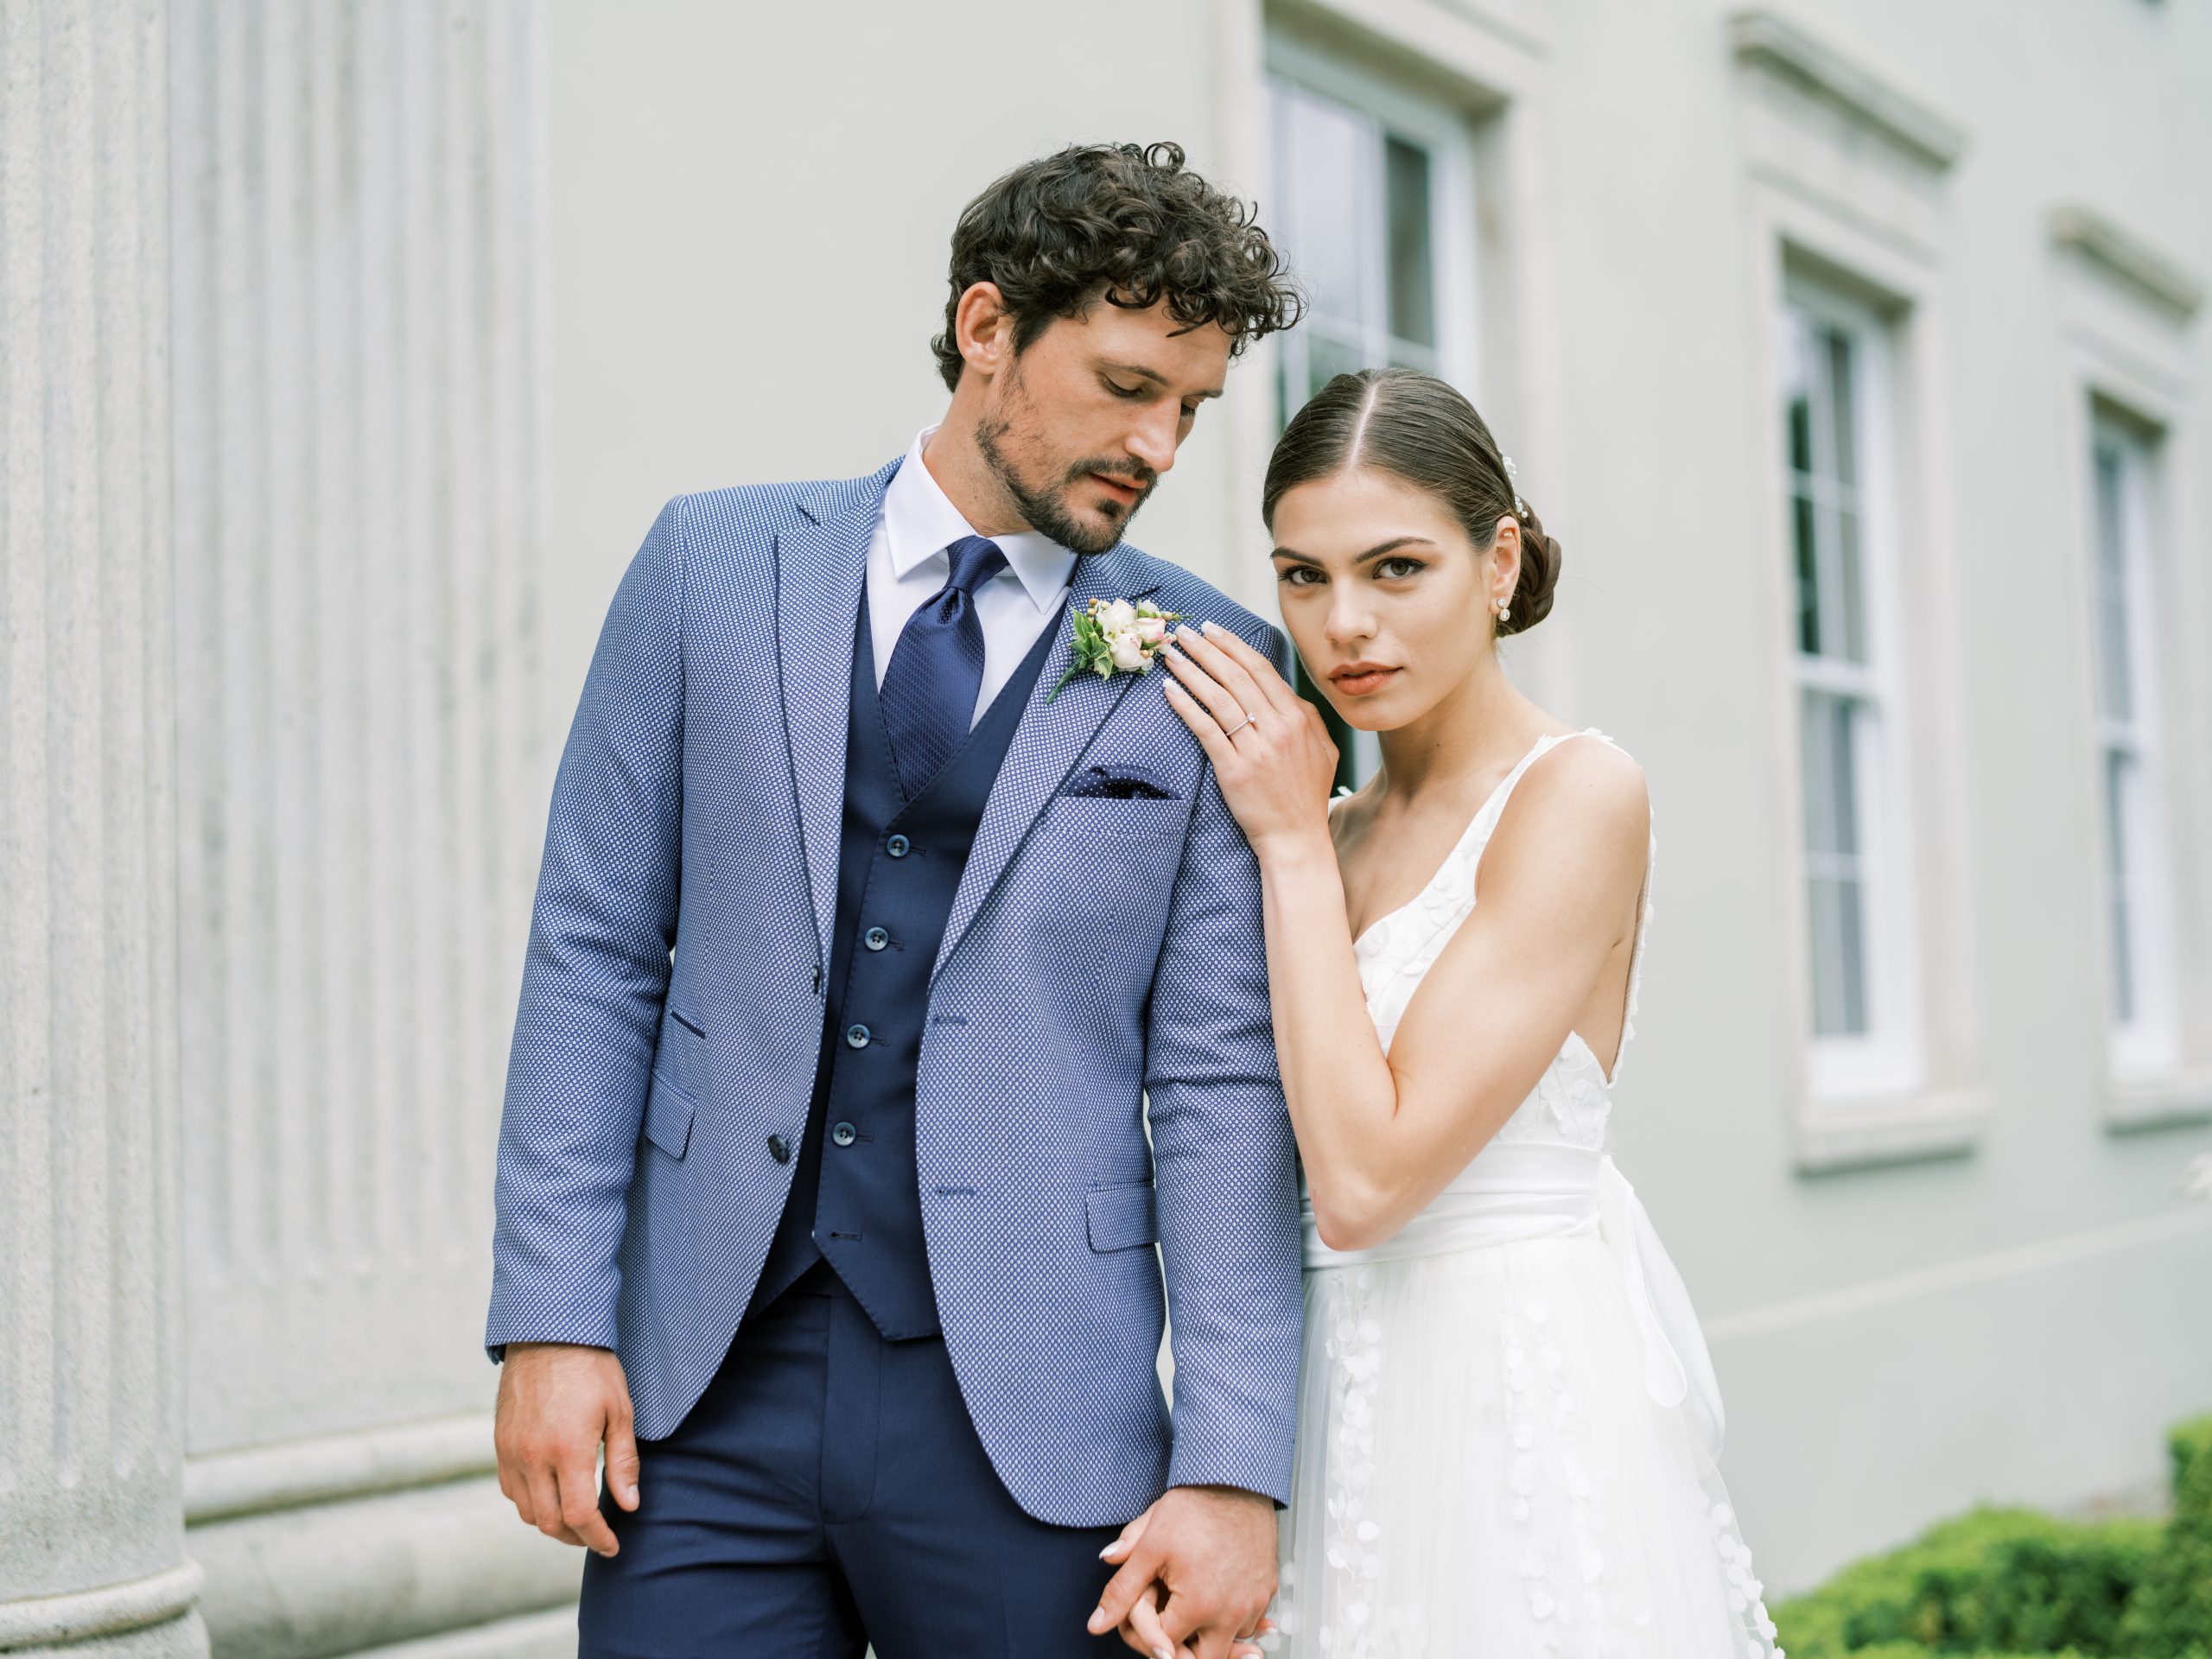 21 On-Trend Summer Wedding Suits for Every Dress Code